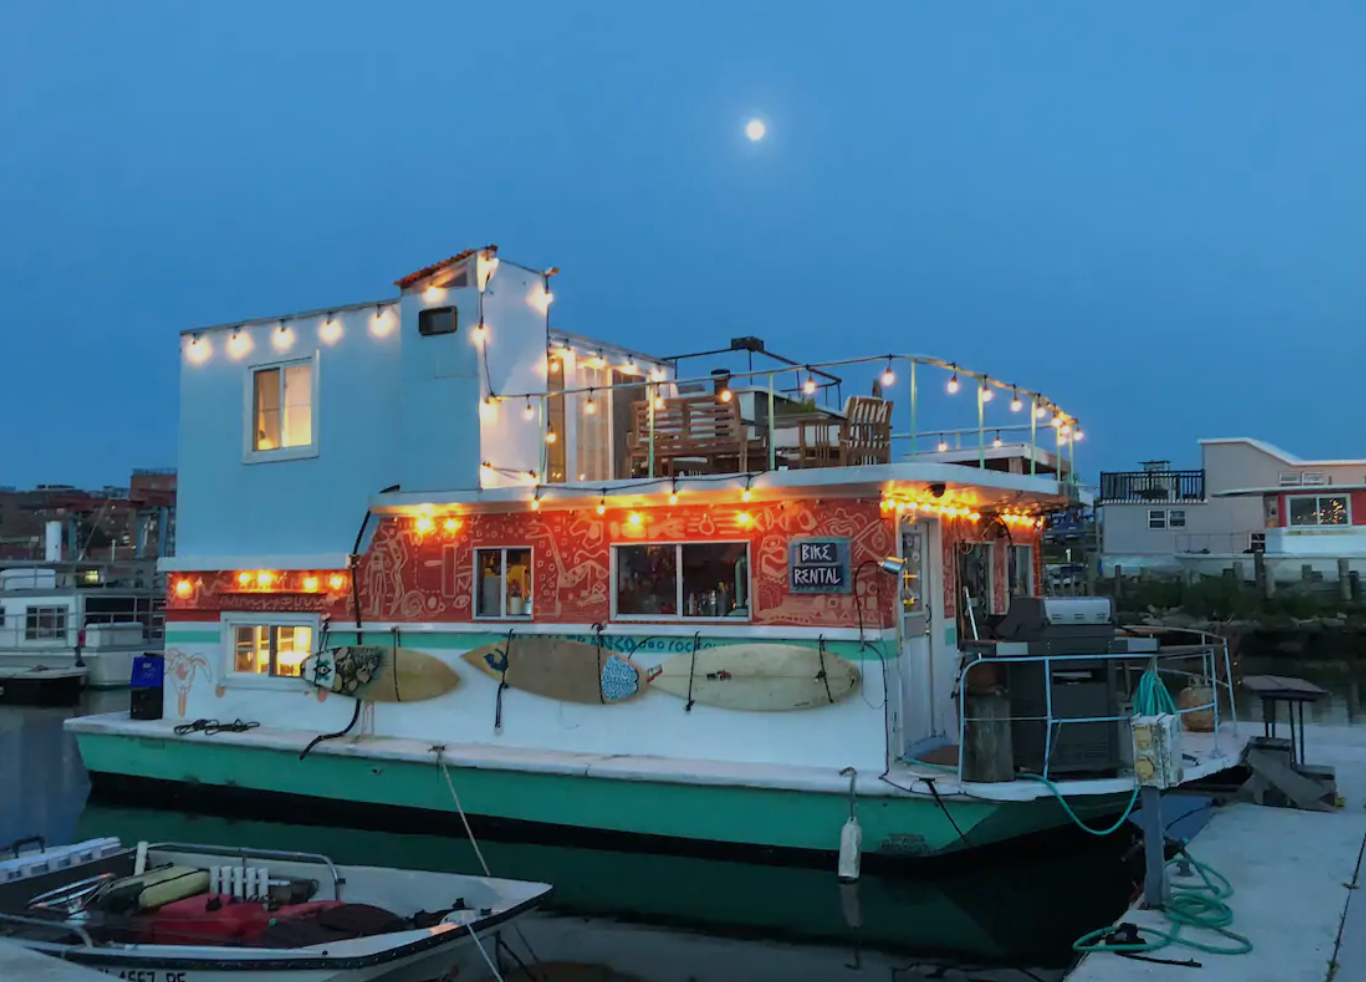 Airbnb Houseboats